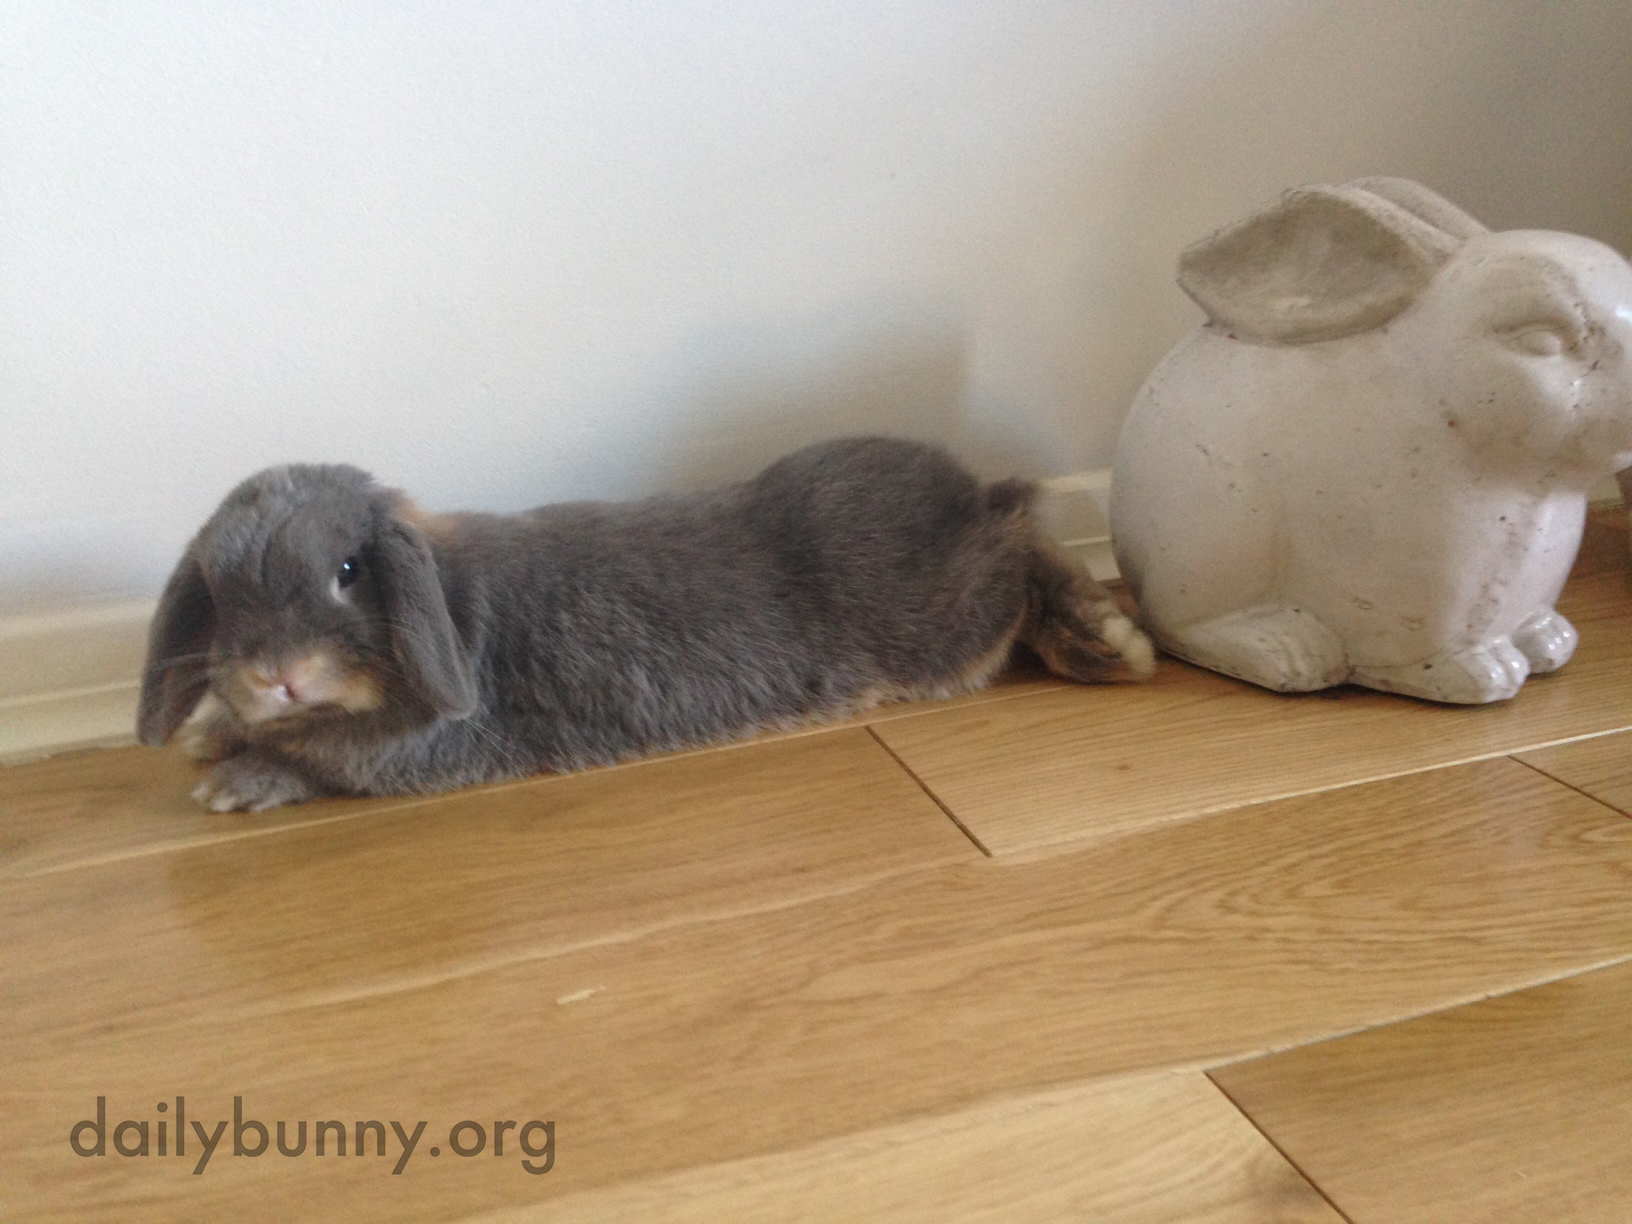 Can't a Grumpy Bunny Just Lie Down without a Human Ooh-ing and Aww-ing and Taking Pictures? 1